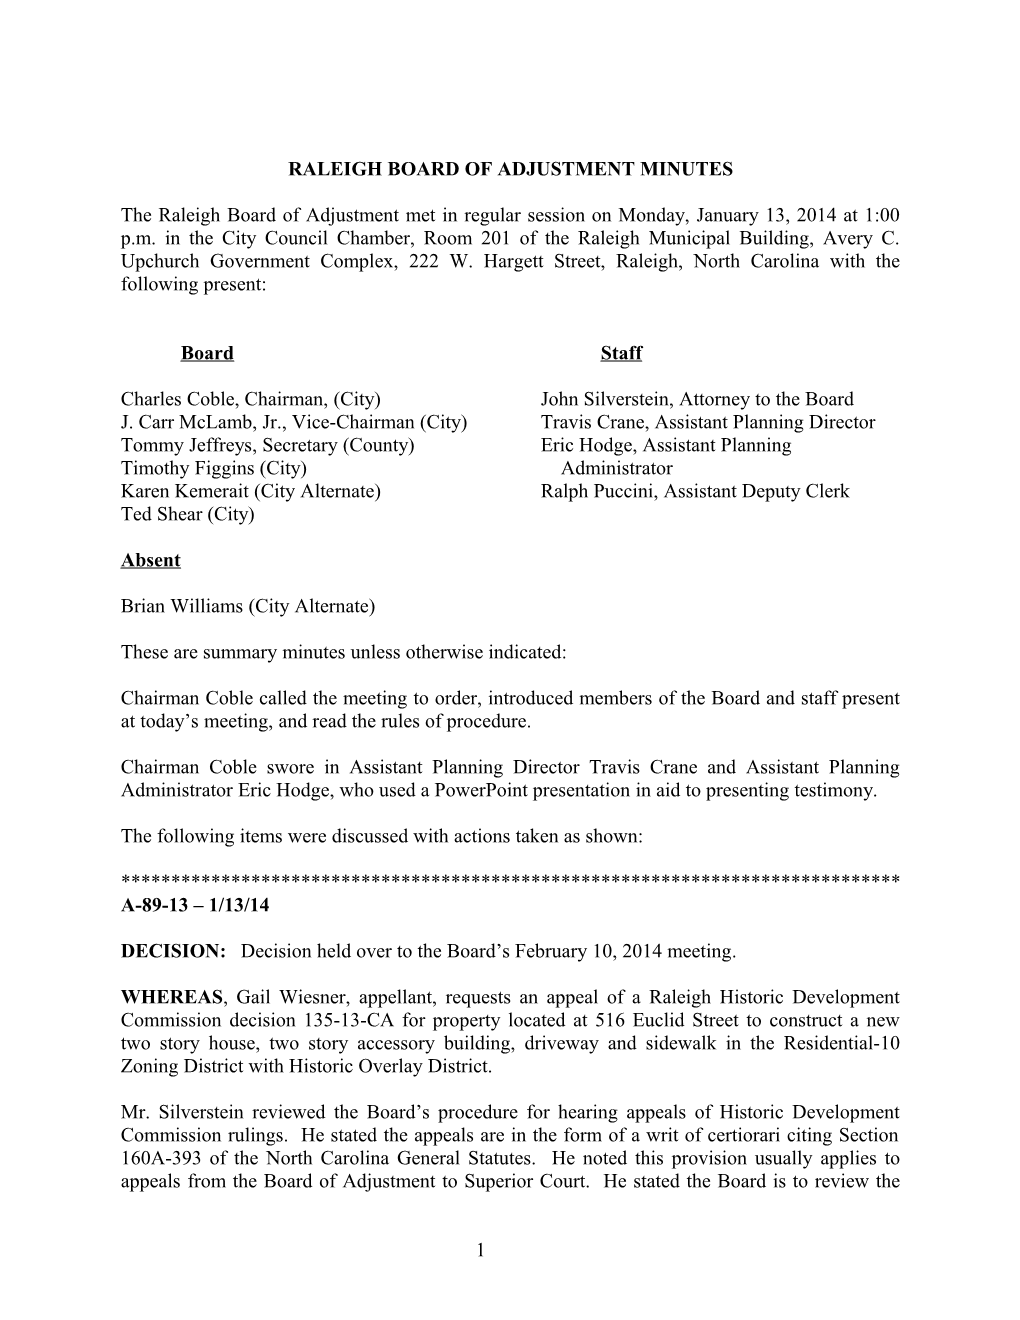 Raleigh Board of Adjustment Minutes - 01/13/2014